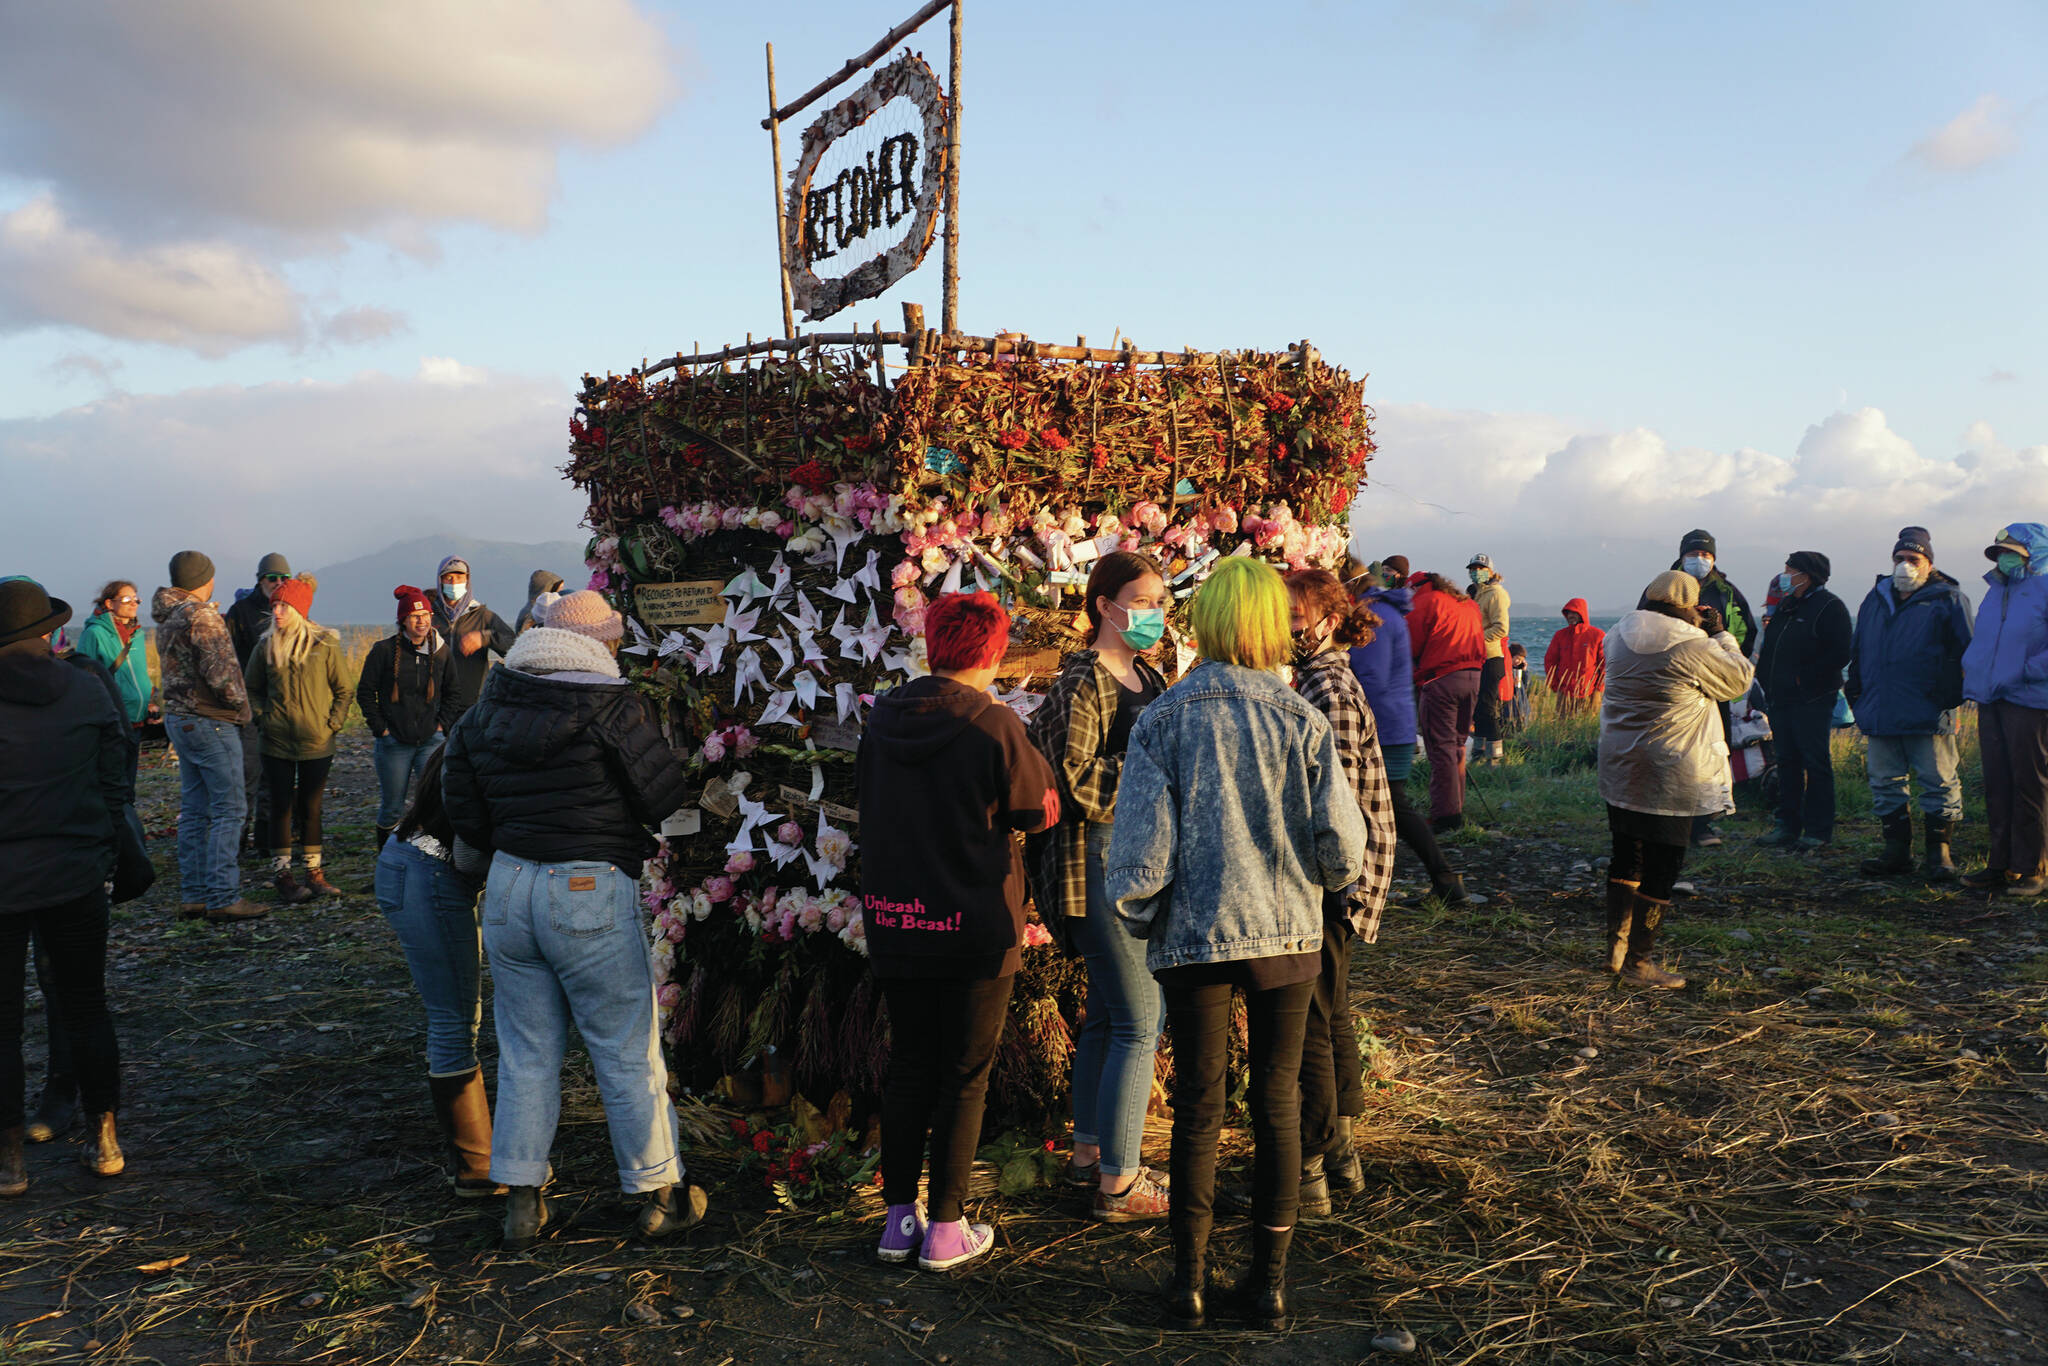 People interact with Recover, the 18th annual Burning Basket, before it’s ignited on Sunday, Sept. 12, 2021, at Mariner Park on the Homer Spit in Homer, Alaska. (Photo by Michael Armstrong/Homer News)